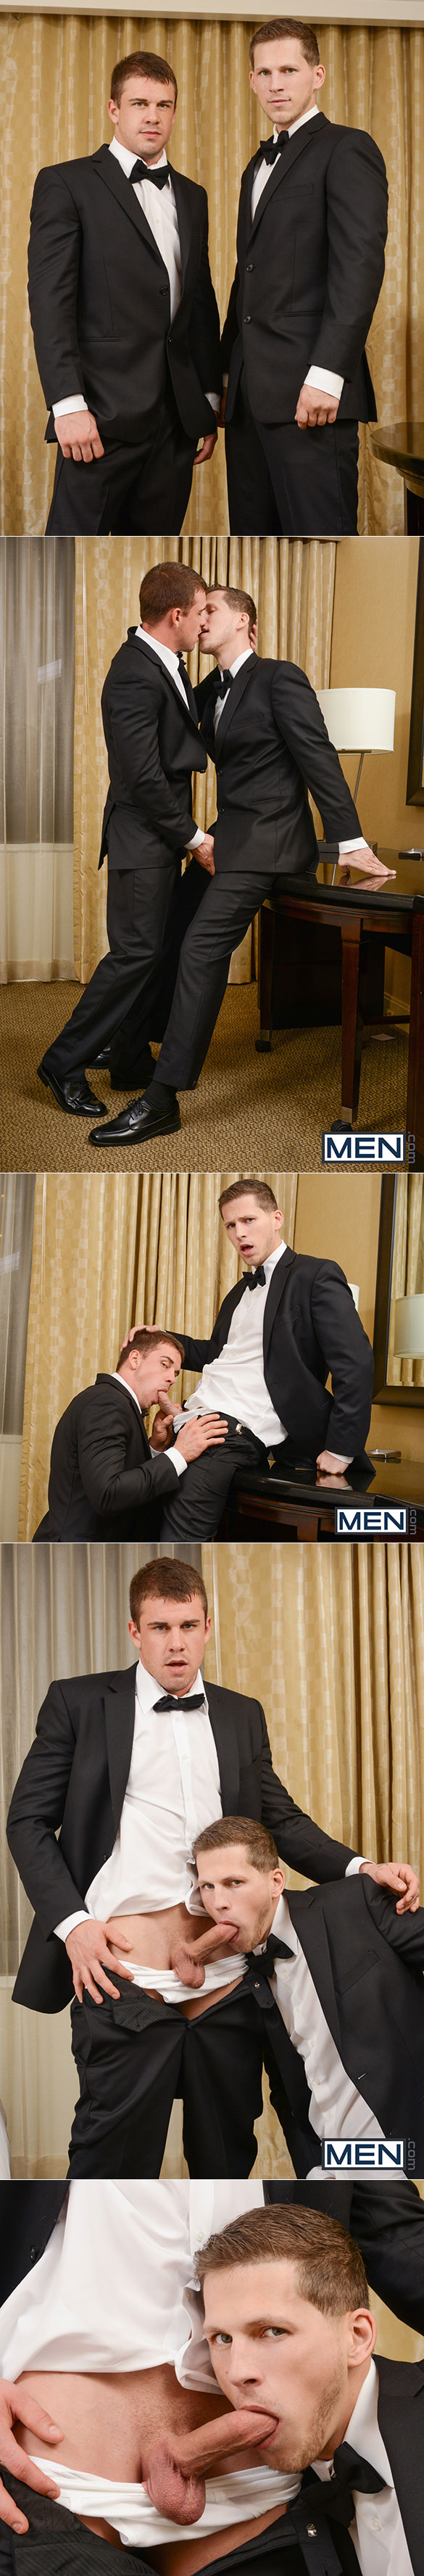 Men.com: Roman Todd gets fucked by Darin Silvers in "The Groomsmen, Part 1"